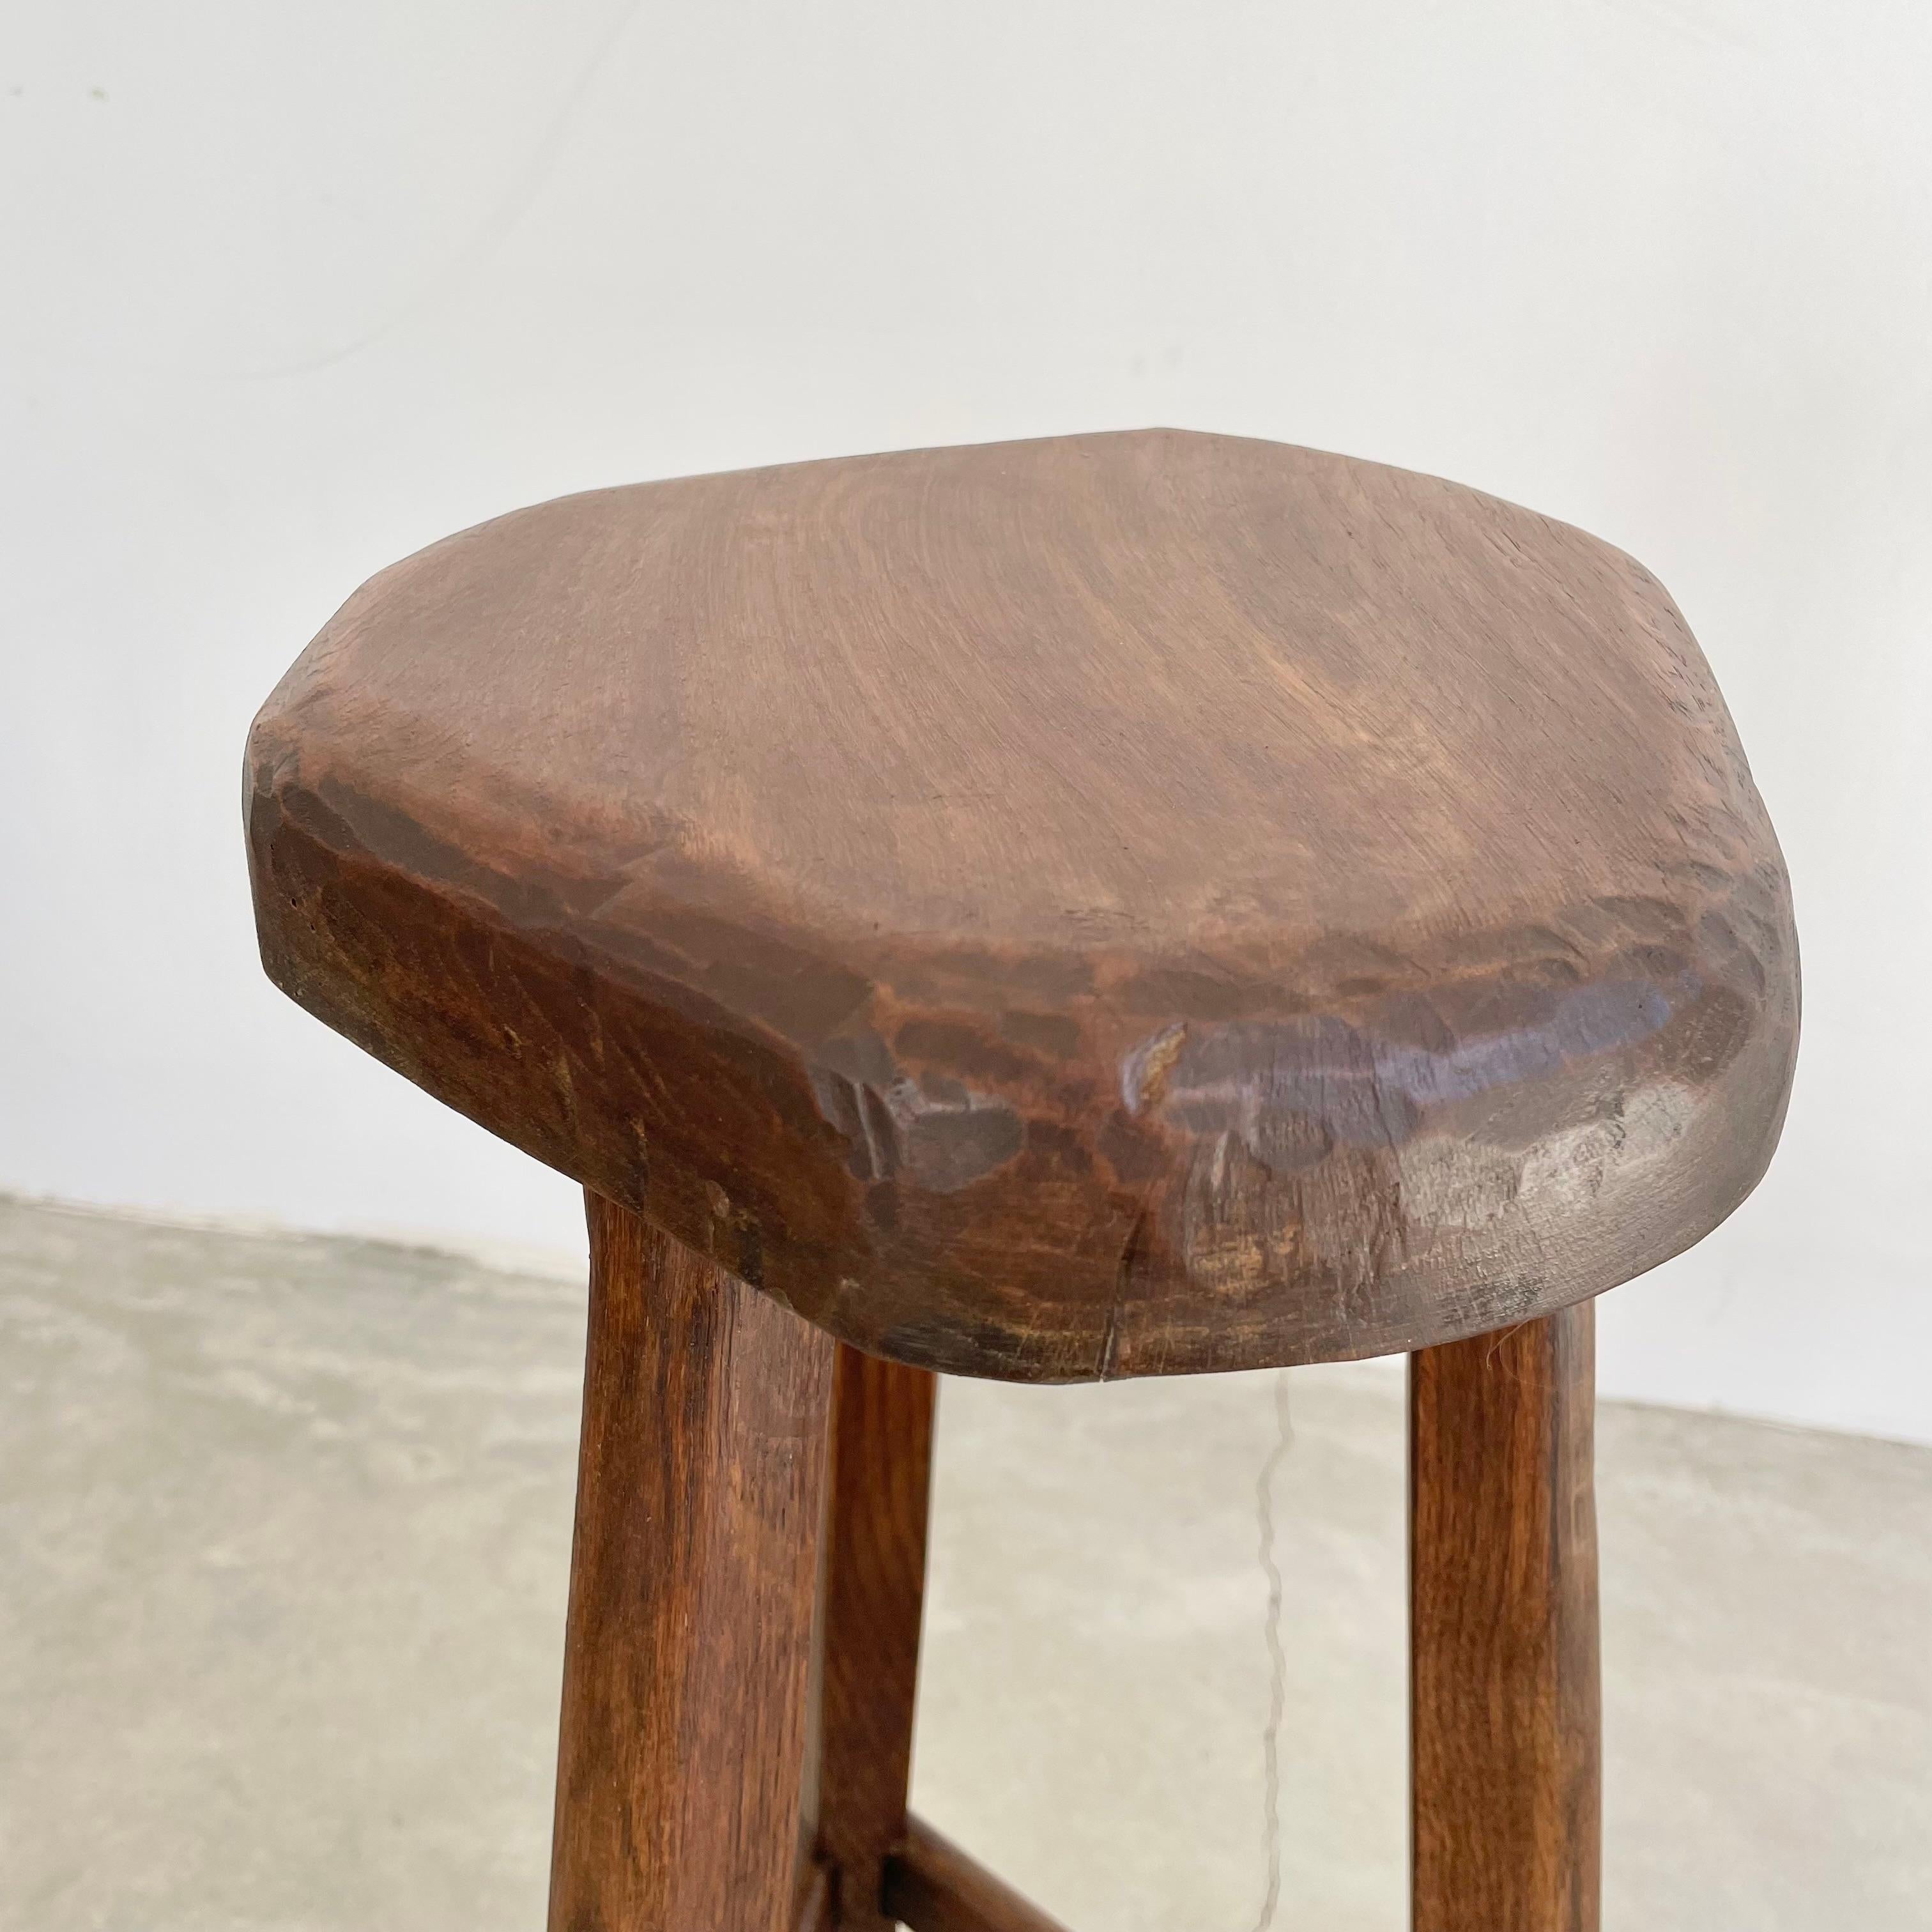 Pair of Tall Brutalist Wood Stools, 1960s France For Sale 5